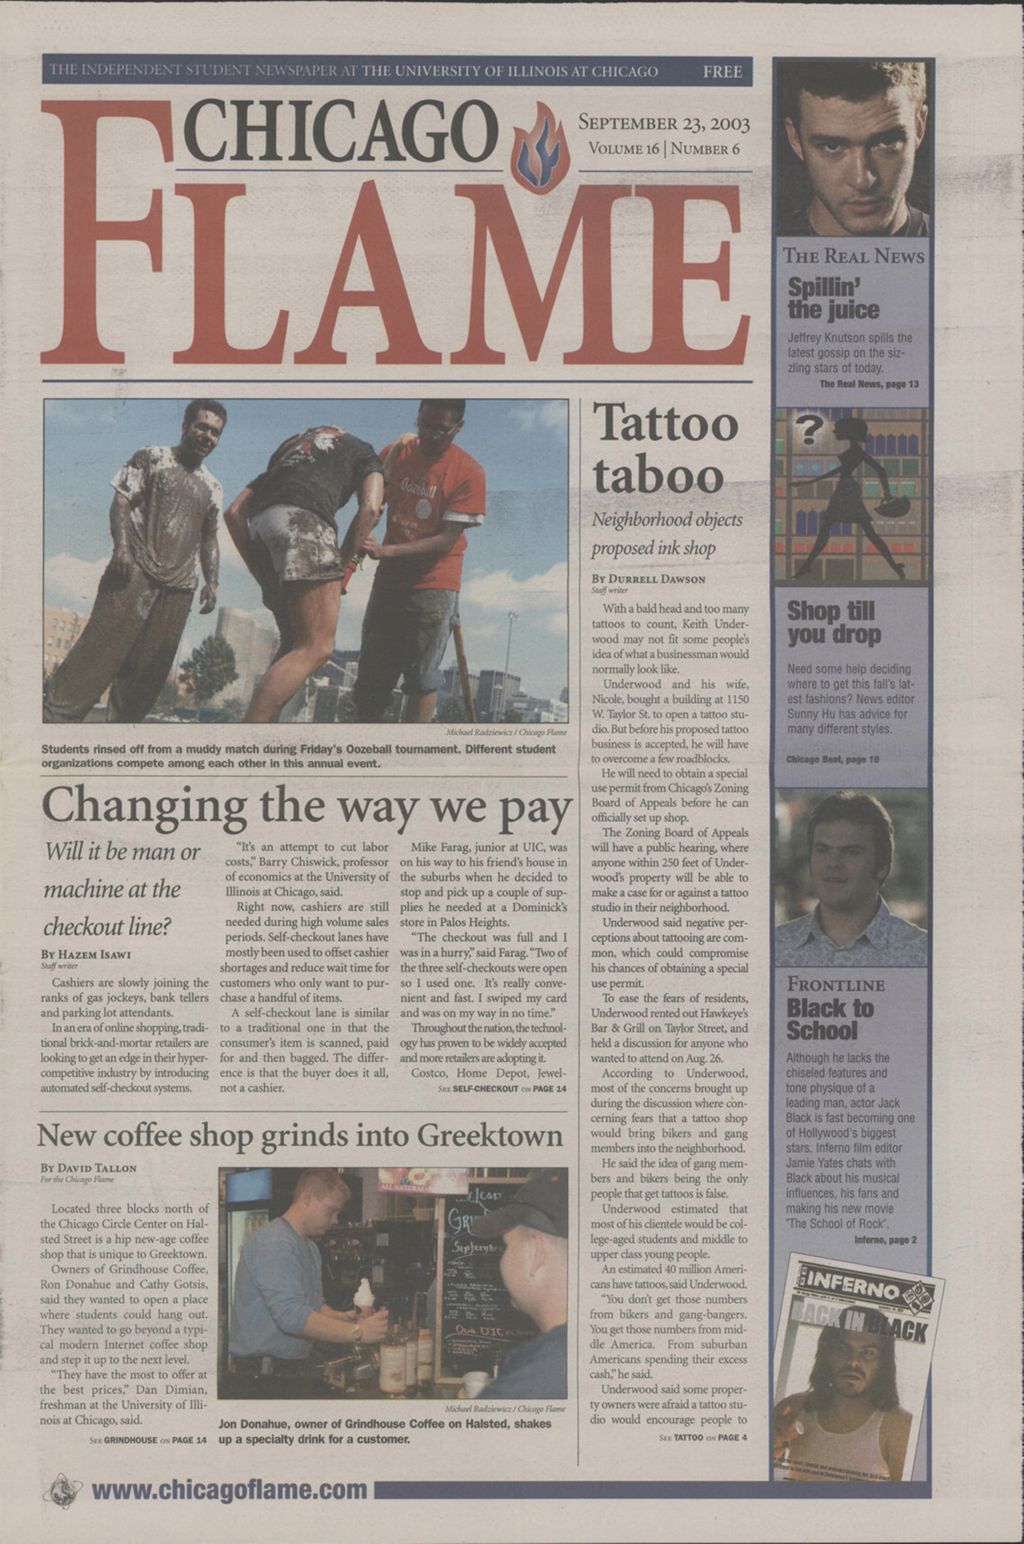 Miniature of Chicago Flame (September 23, 2003)